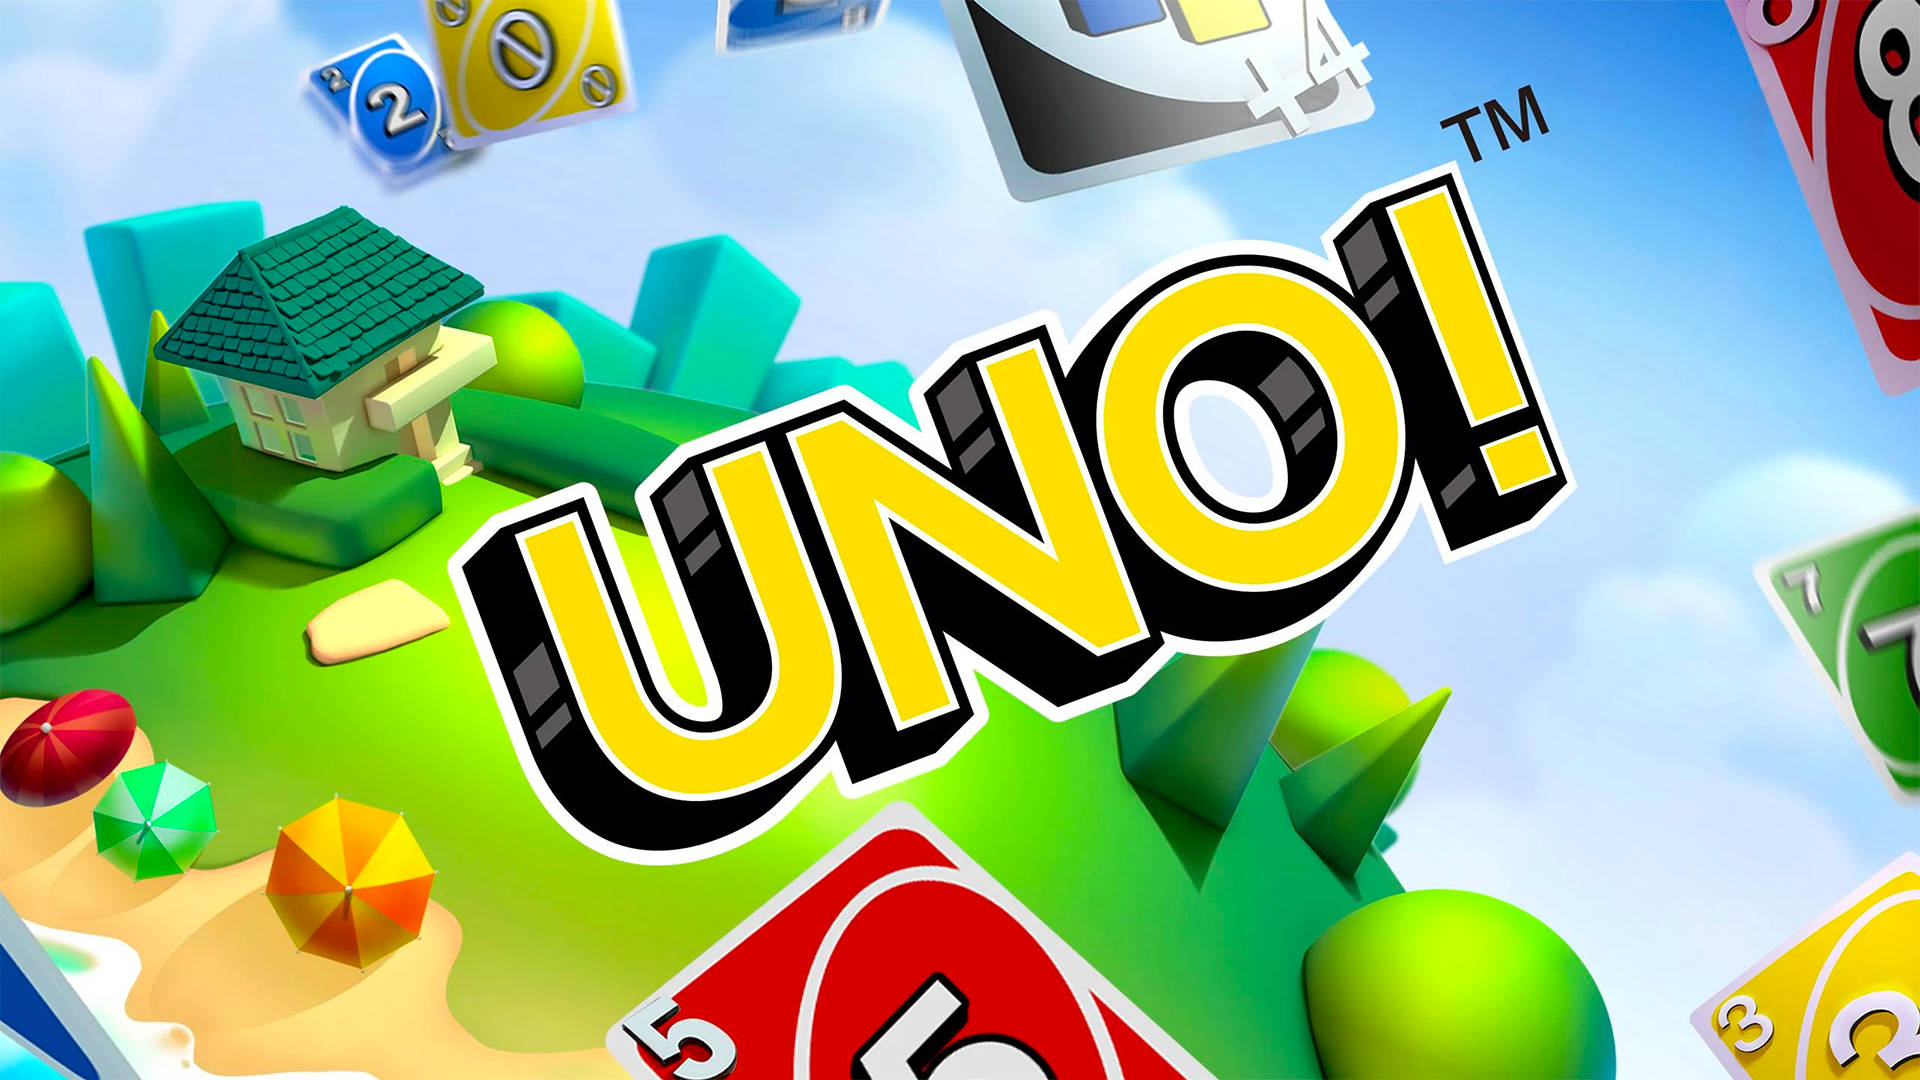 An Exciting Play In Uno - Colorful Uno Card Deck Spread Out On A Table Background